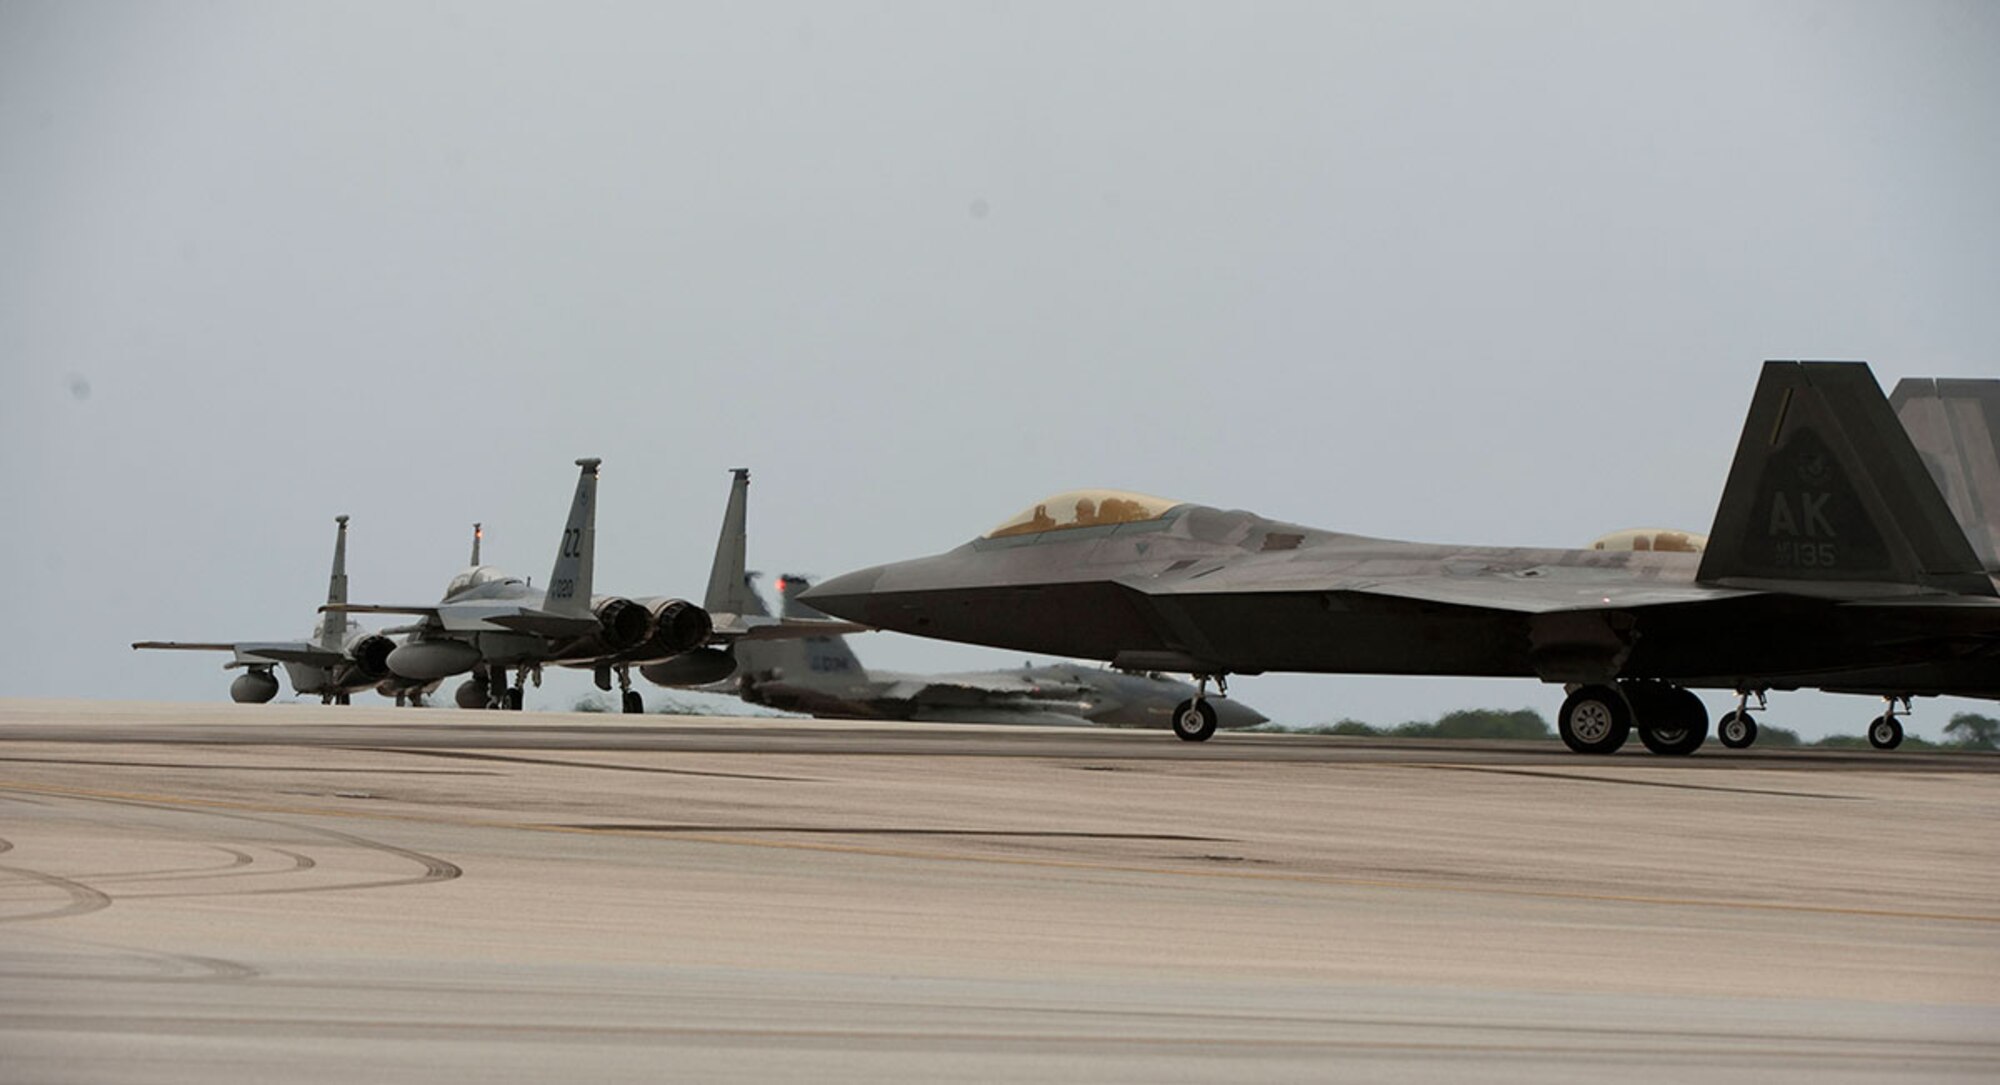 A U.S. Air Force F-15C Eagle and F-22 Raptor taxi during Valiant Shield 2014 in anticipation of operations in a joint airspace environment, Sept. 16, 2014, Andersen Air Force Base, Guam. Valiant Shield is a U.S.-only exercise, integrating an estimated 18,000 U.S. Navy, Air Force, U.S. Army and U.S. Marine Corps personnel, more than 200 aircraft and 19 surface ships, offering real-world joint operational experience to develop capabilities that provide a full range of options to defend U.S. interests and those of its allies and partners. (U.S. Air Force Photo by Staff Sgt. William Banton/Released)